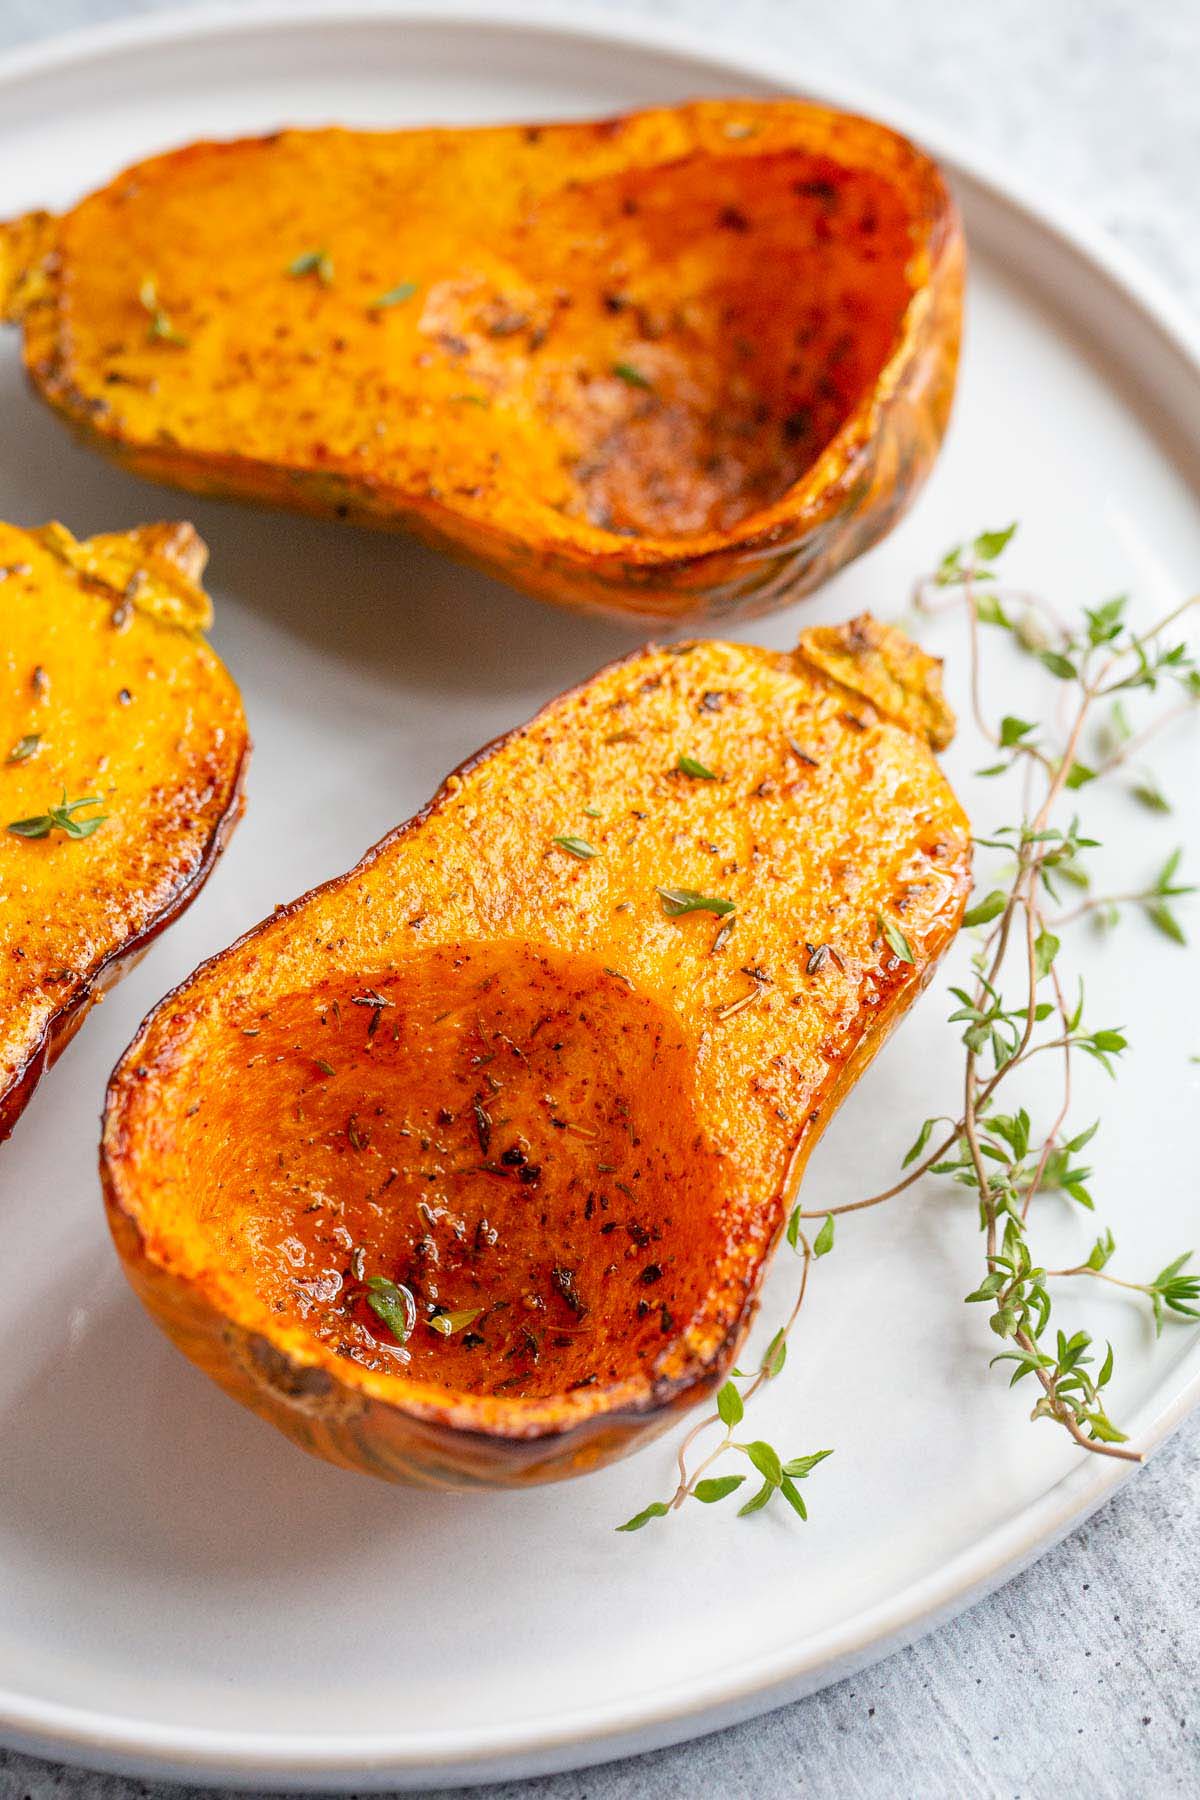 Roasted honeynut squash on a plate with thyme leaves.